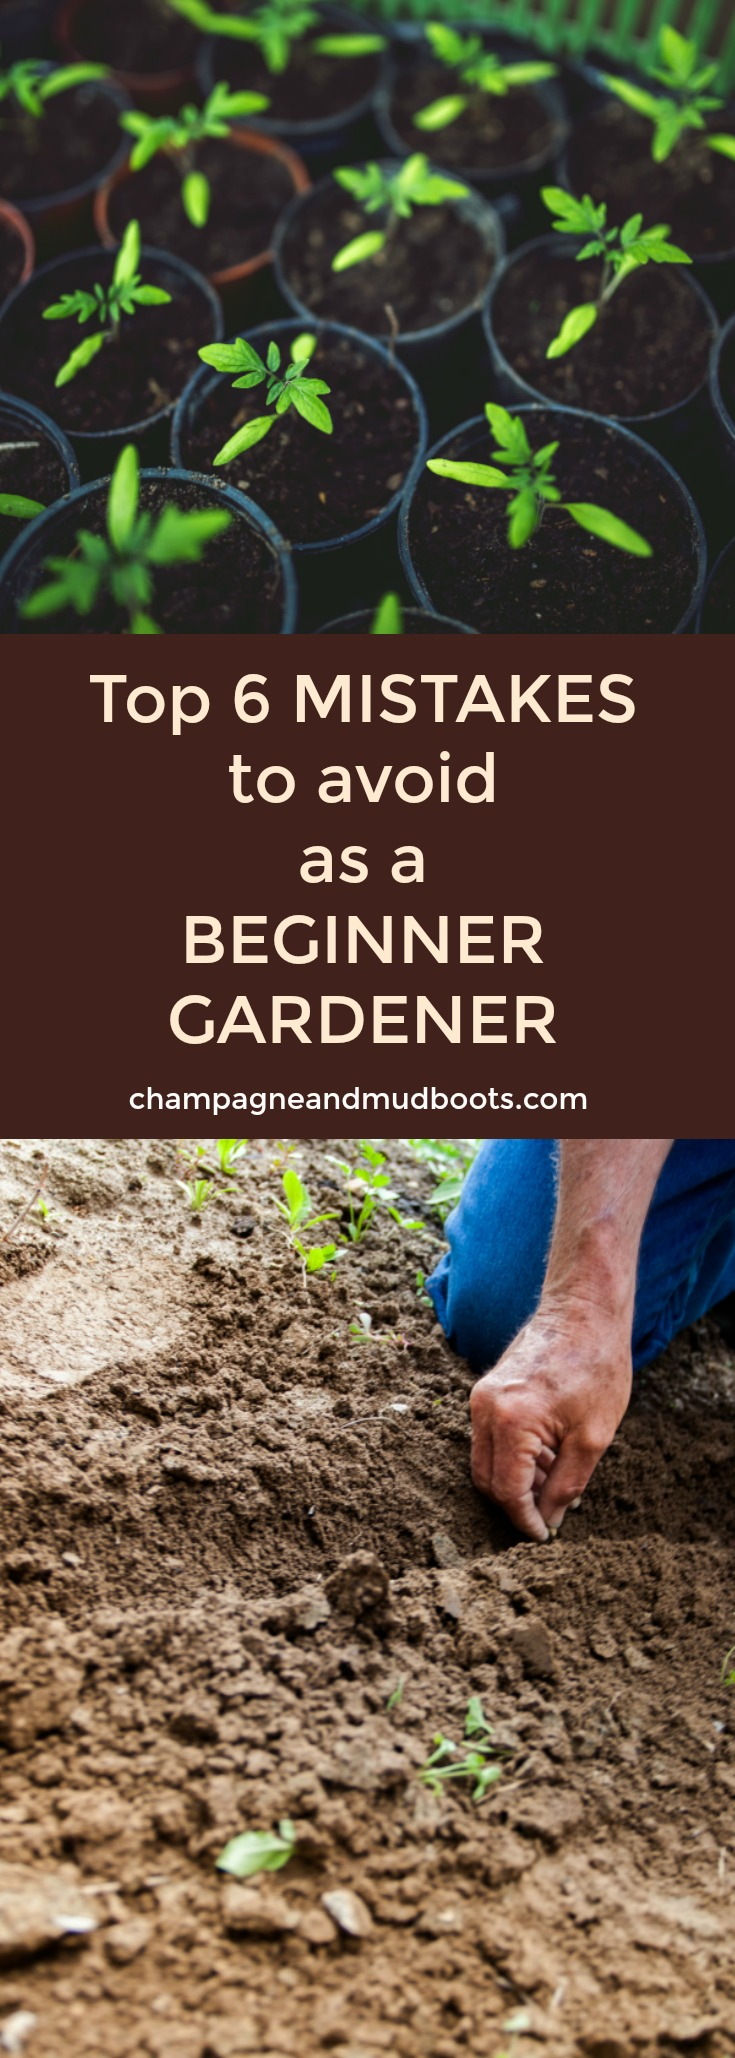 This article provides the top mistakes of my beginner gardener experience and how you can avoid them to have a better vegetable garden.